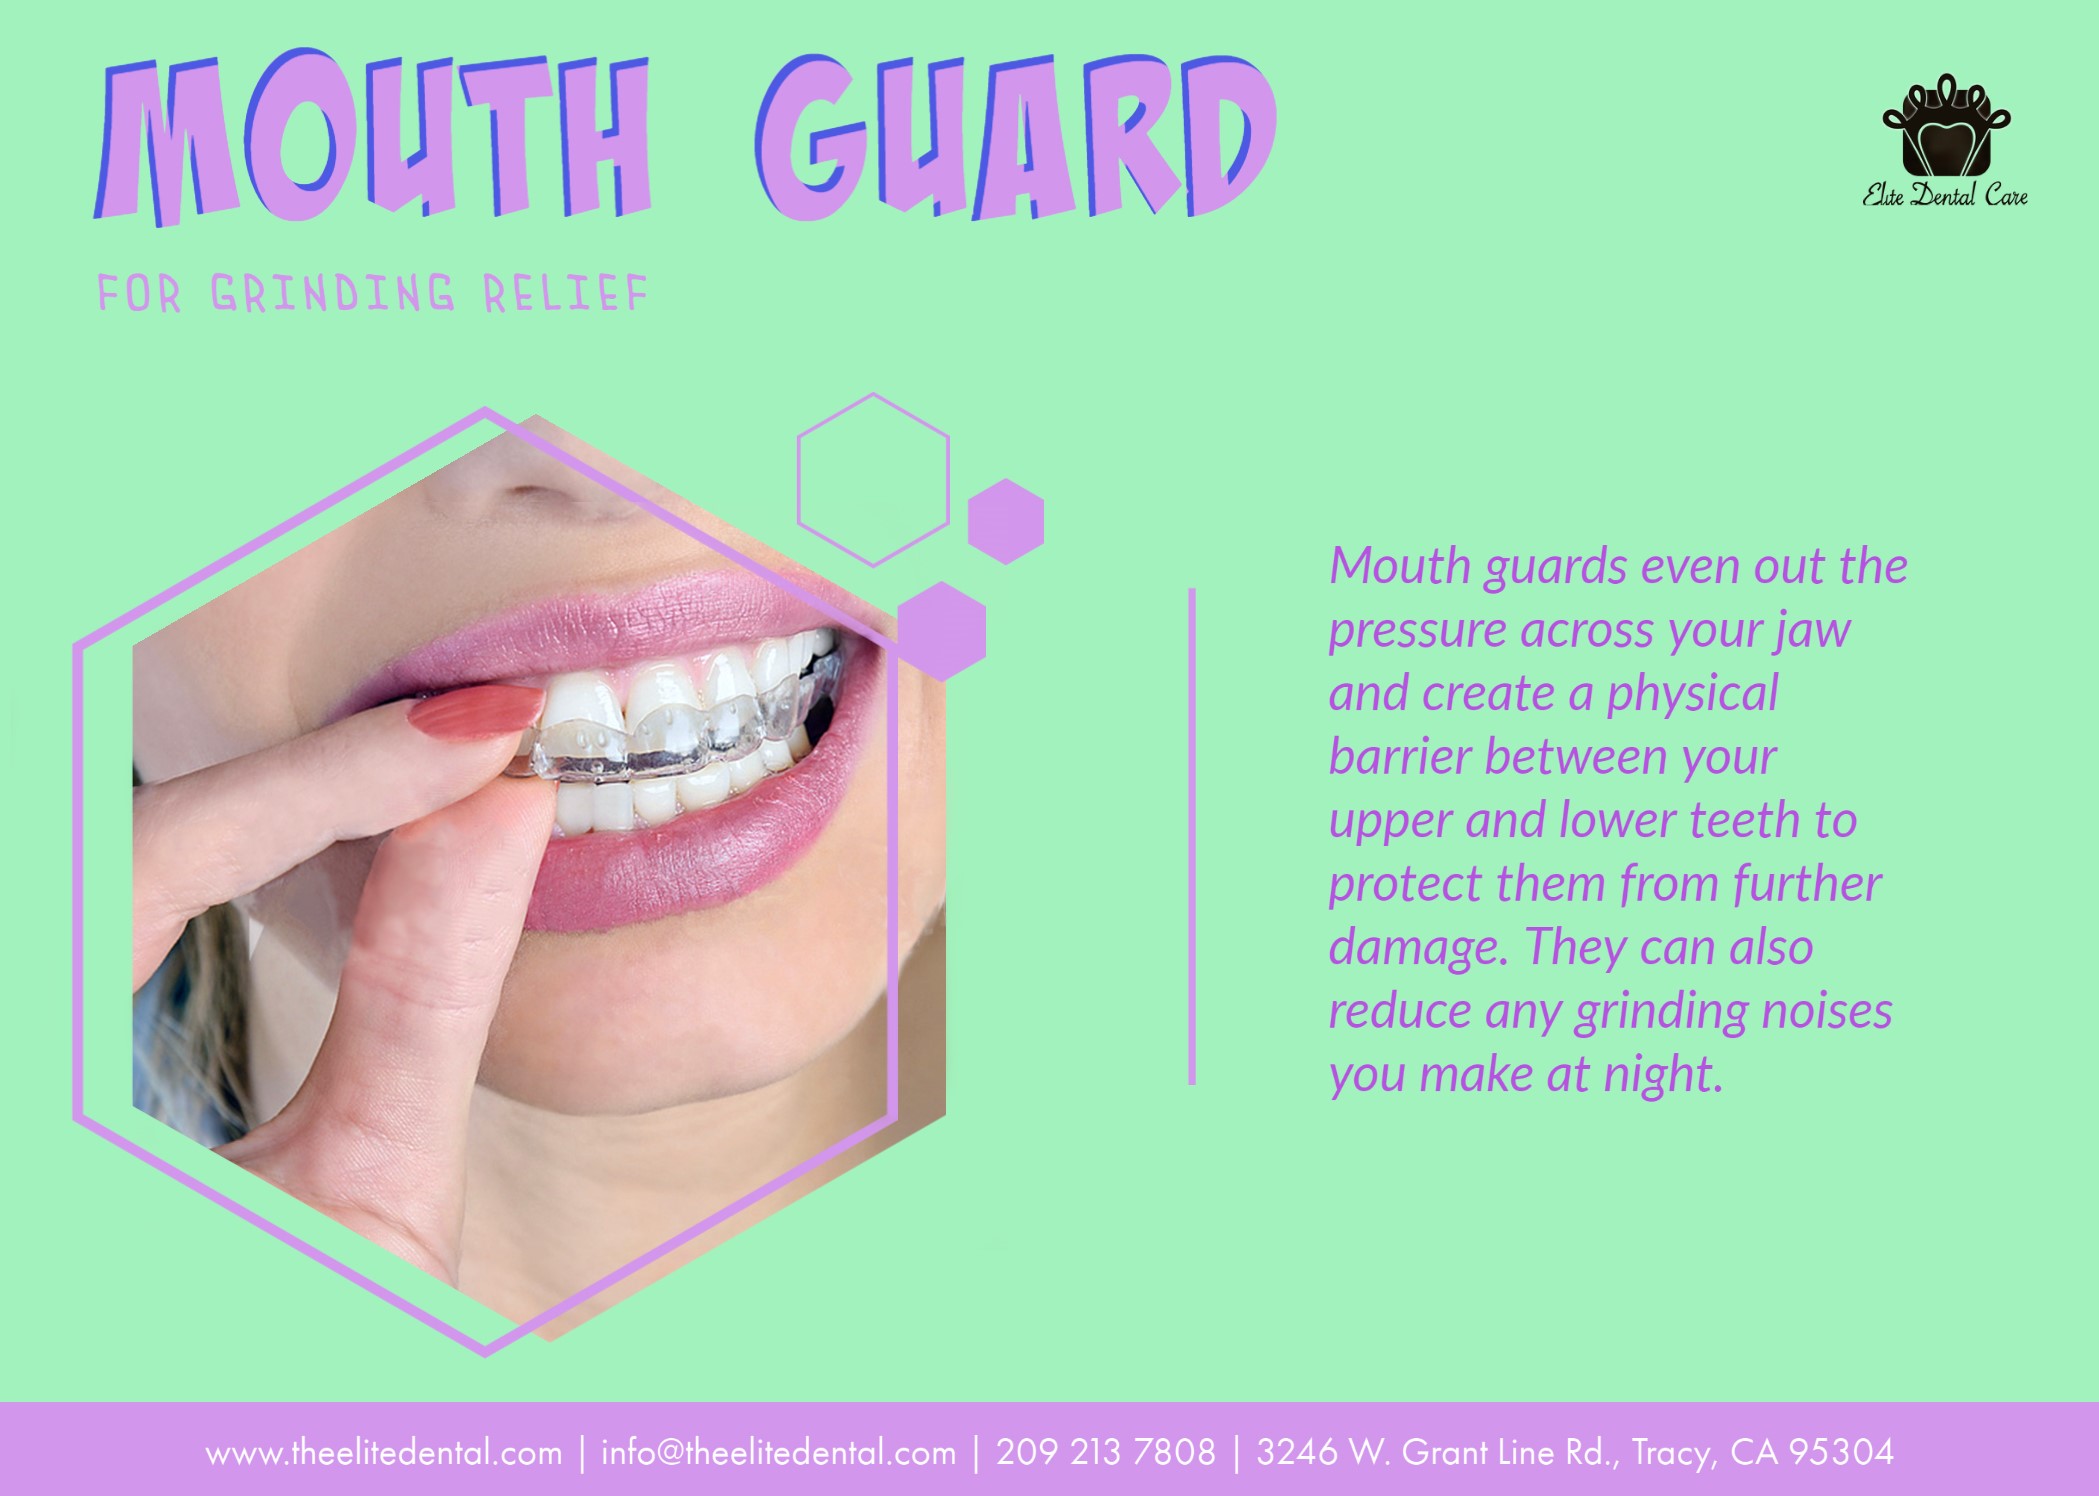 MOUTHGUAD FOR TEETH GRINDING – ELITE DENTAL CARE TRACY